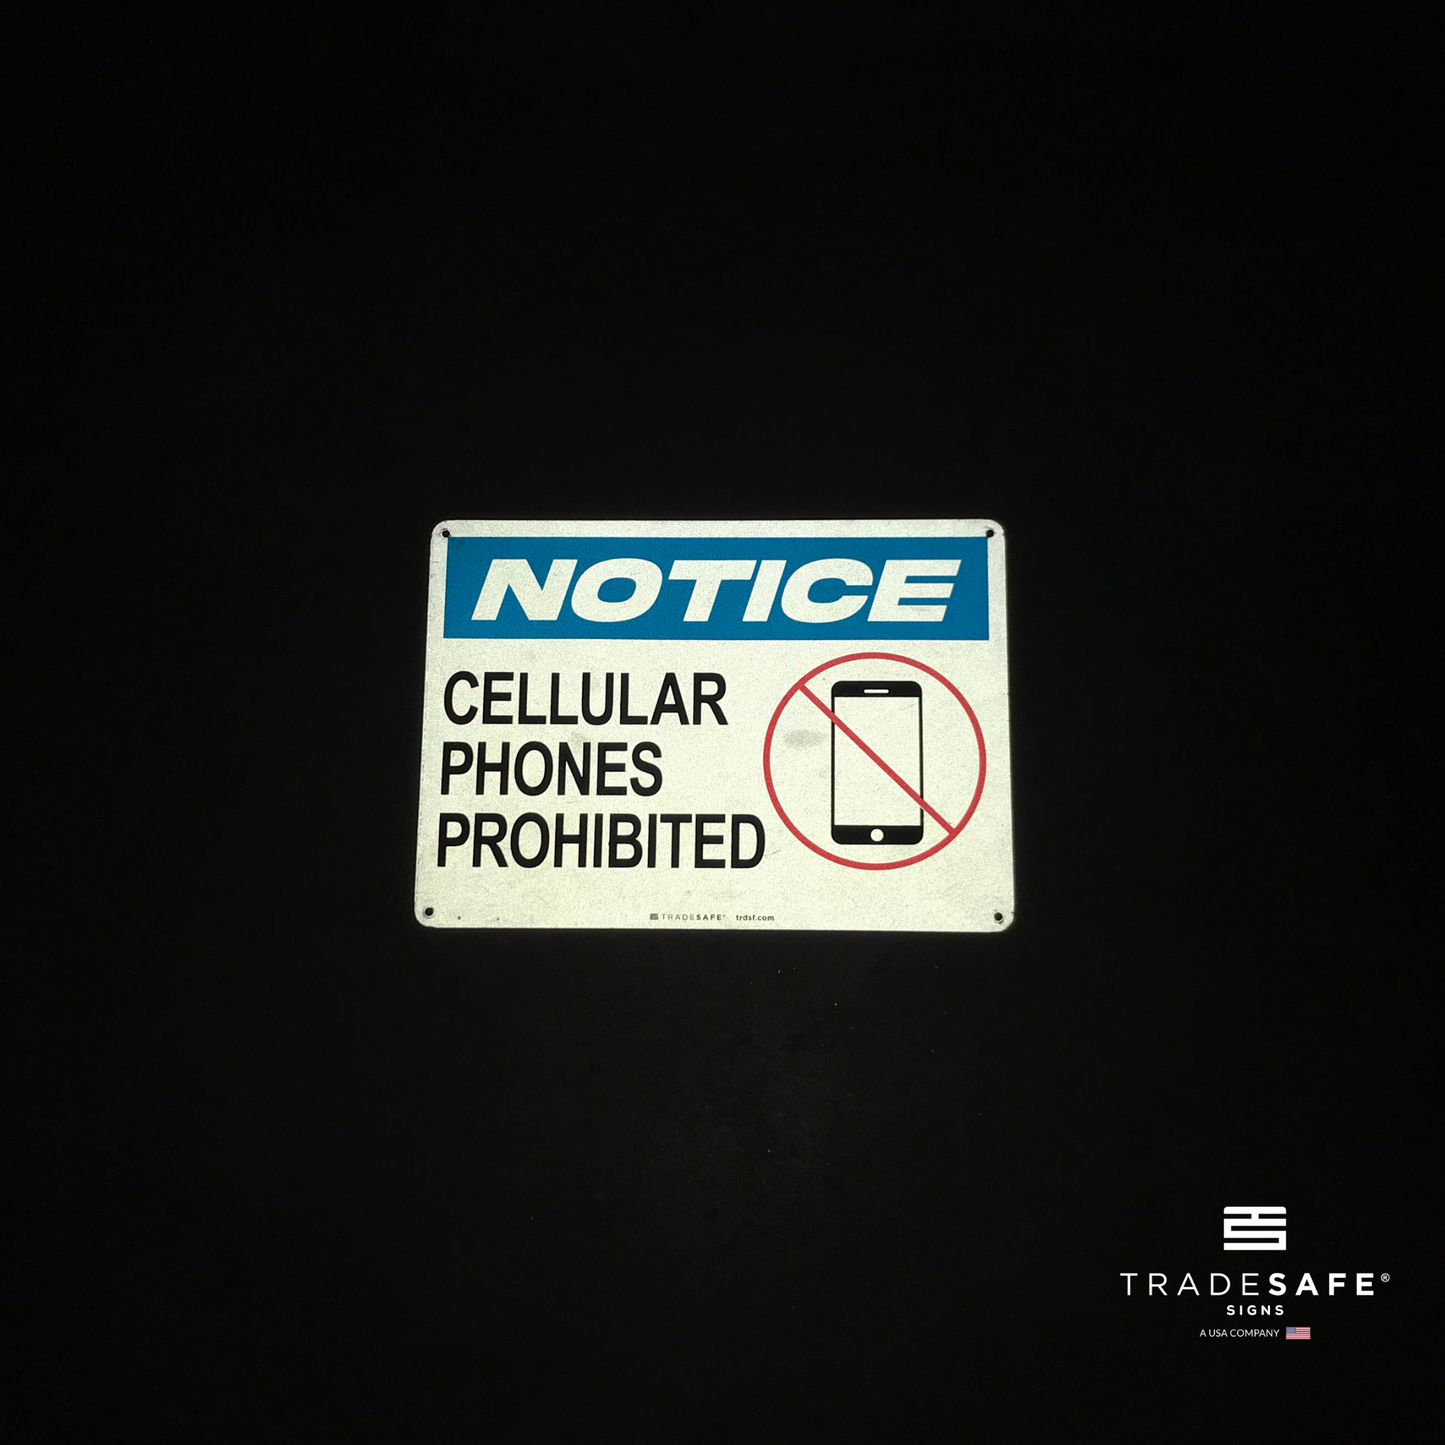 reflective attribute of cell phone prohibited sign on black background